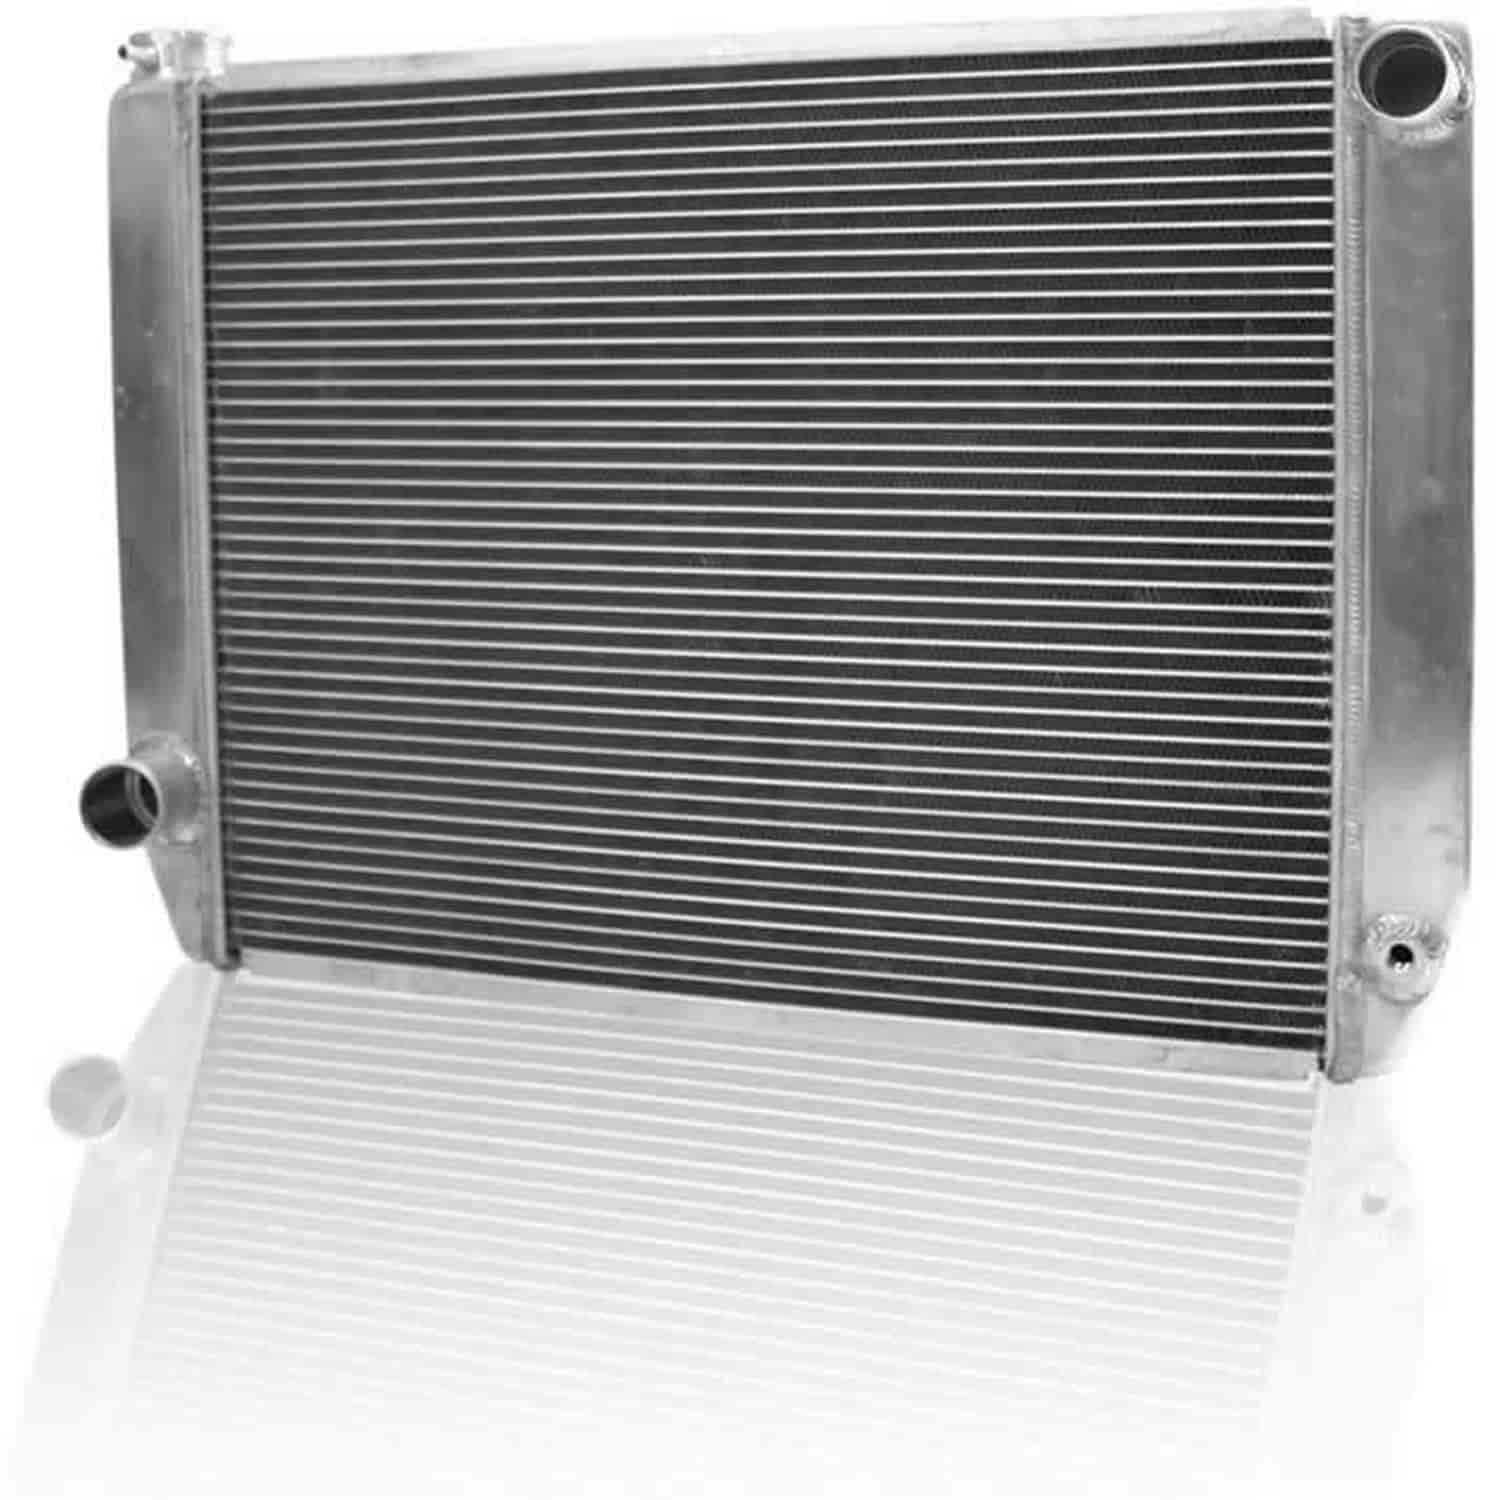 ClassicCool Universal Fit Radiator Single Pass Crossflow Design 27.50" x 19" with Straight Outlet